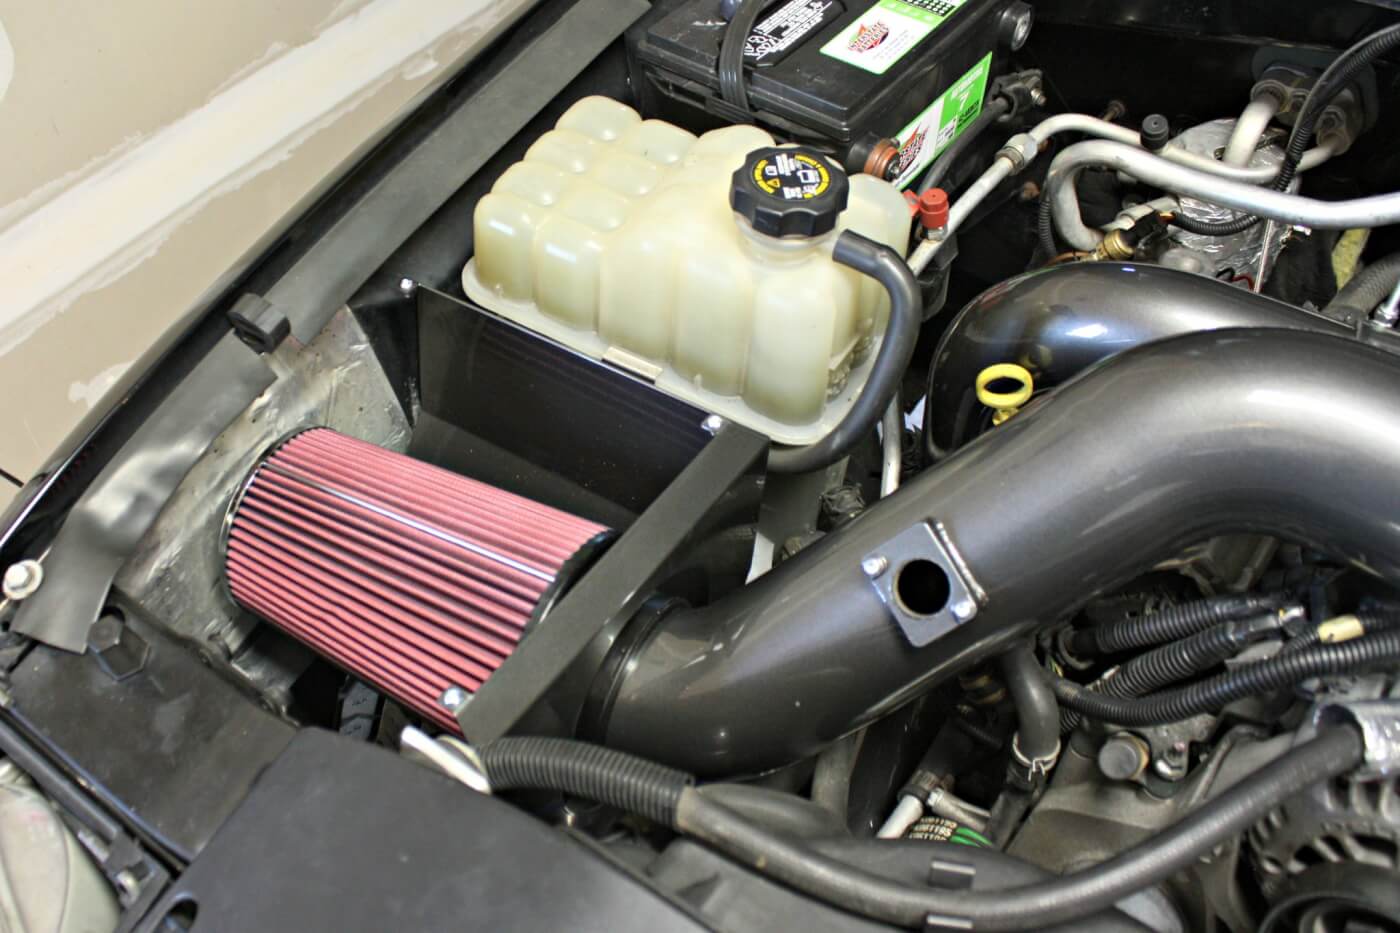 10. The final piece of the puzzle is the hand-fabricated airbox and 4-inch, mandrel-bent intake pipe that routes clean, filtered air into the mouth of the new turbocharger. The complete system comes powdercoated in your choice of color, so it not only improves performance, but looks incredible doing it.